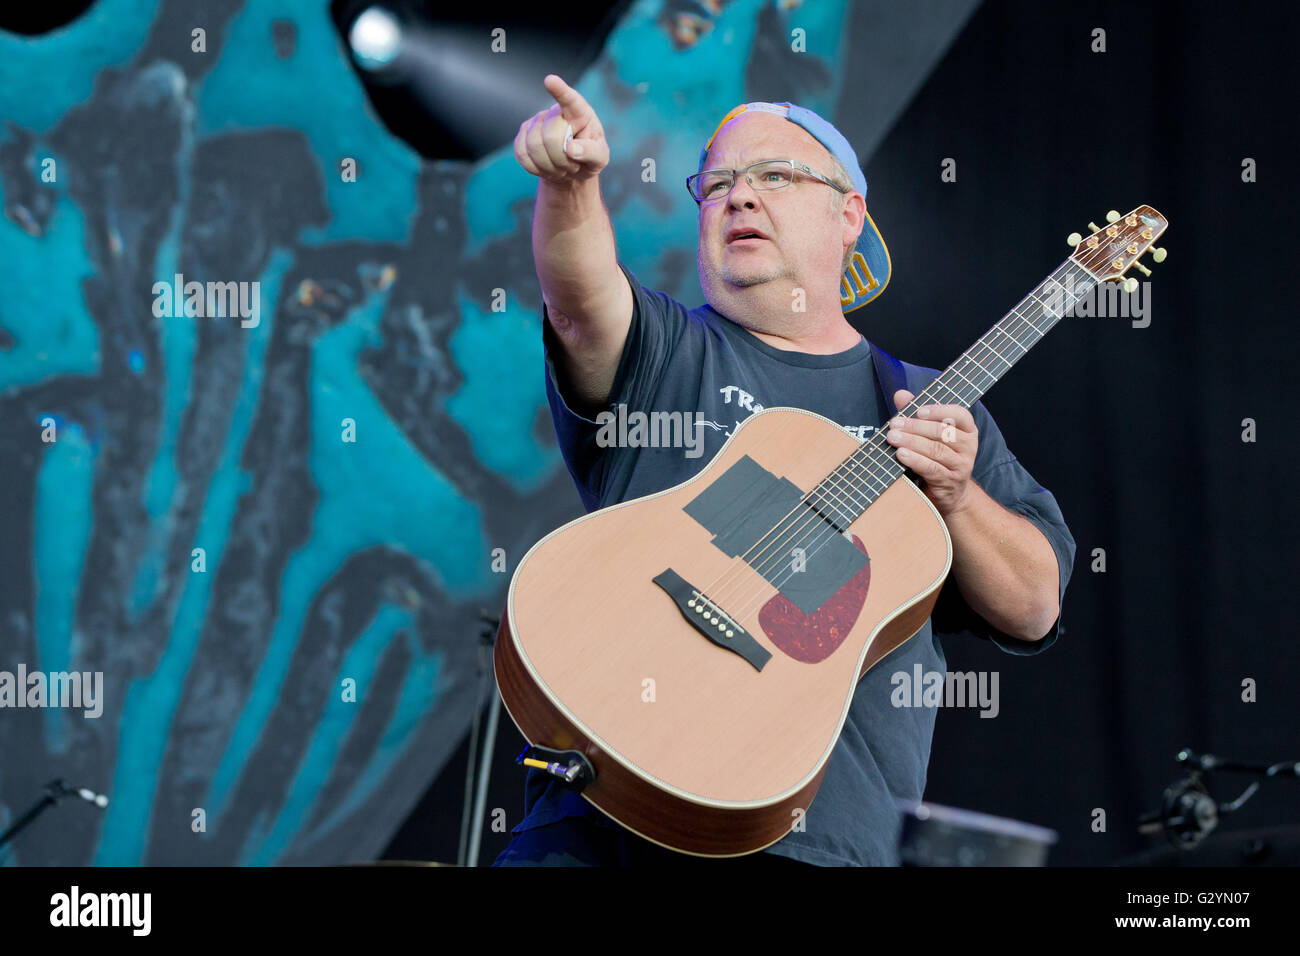 Nuremberg, Germany. 04th June, 2016. US singer and actor Kyle Gass of the band Tenacious D. performs on stage at the 'Rock im Park' (Rock in the Park) music festival in Nuremberg, Germany, 04 June 2016. More than 80 bands are set to perform at the festival until 05 June. Photo: DANIEL KARMANN/dpa/Alamy Live News Stock Photo